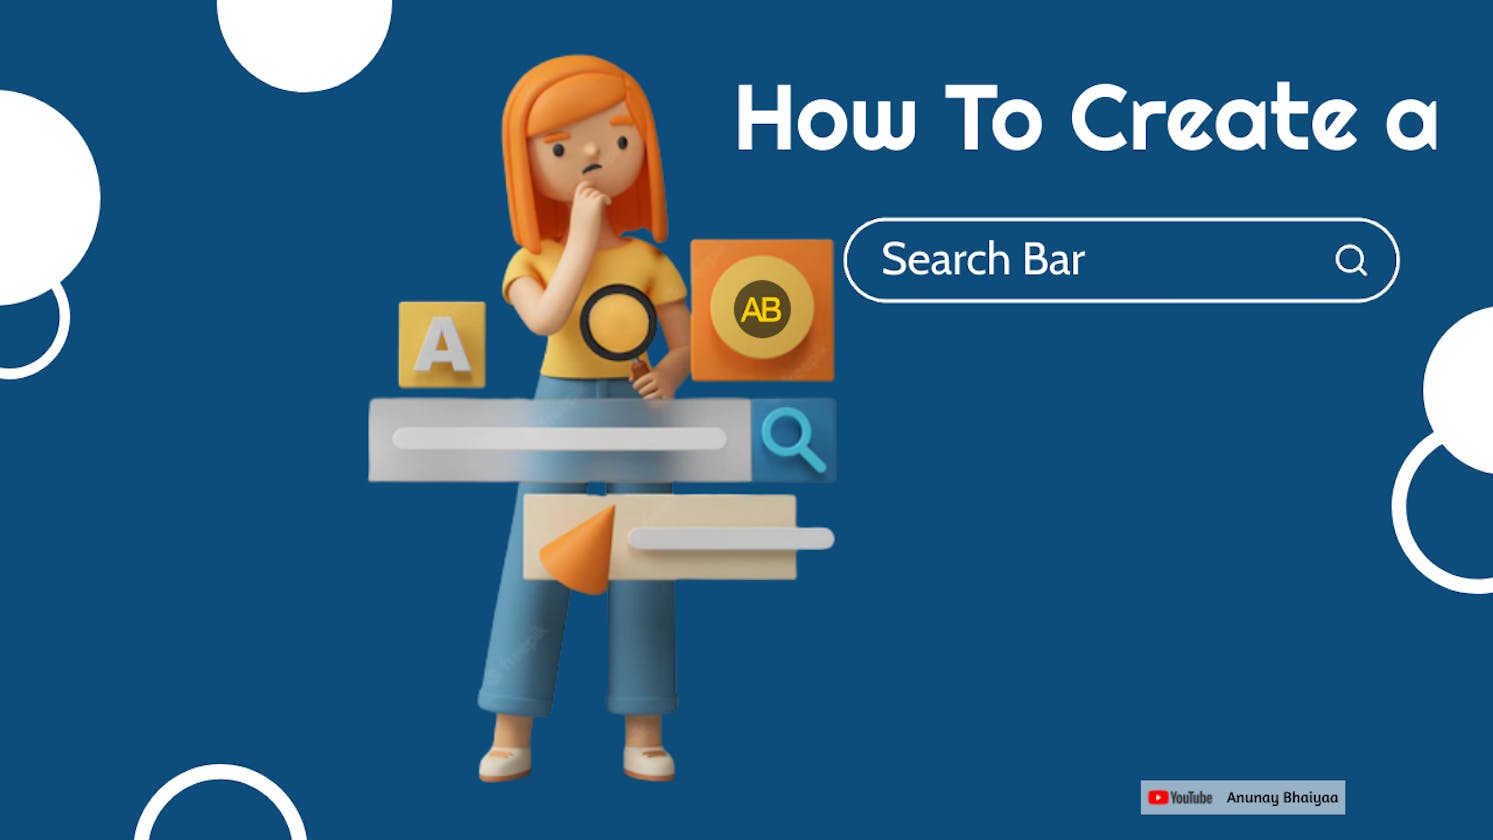 How To Create A Search Bar using HTML, CSS & JS